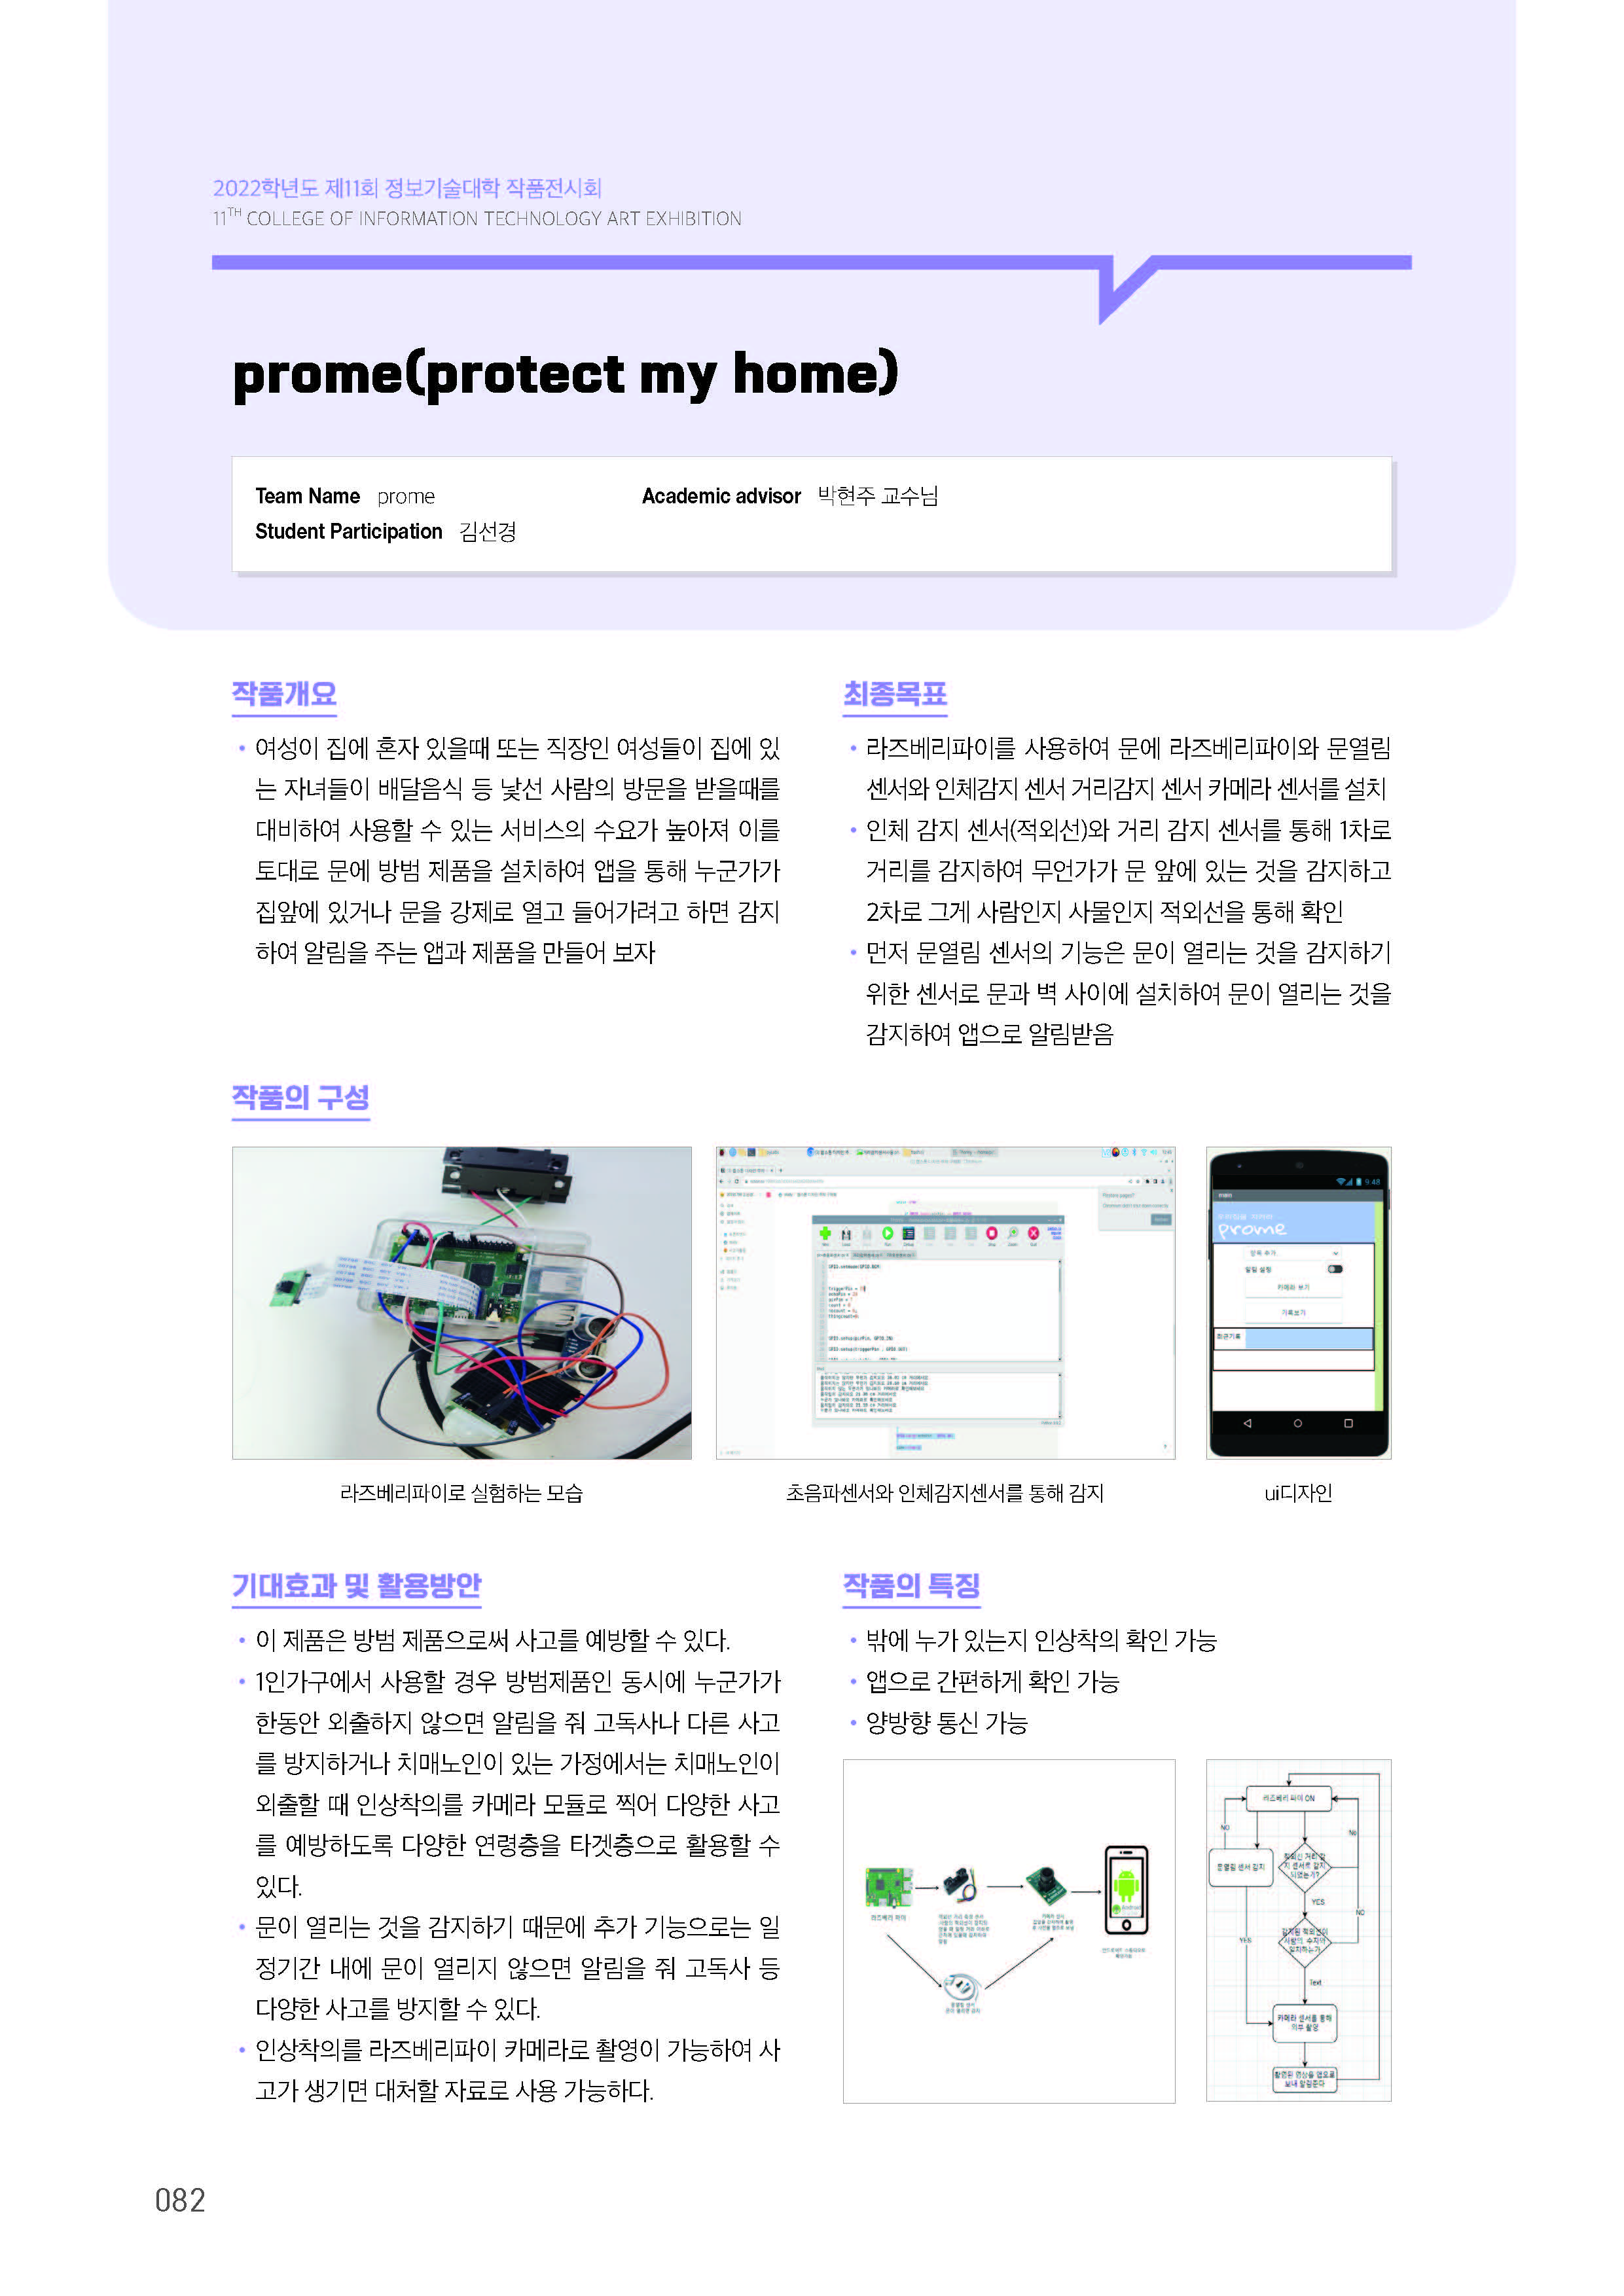 [2022-082] prome(protect my home) 이미지